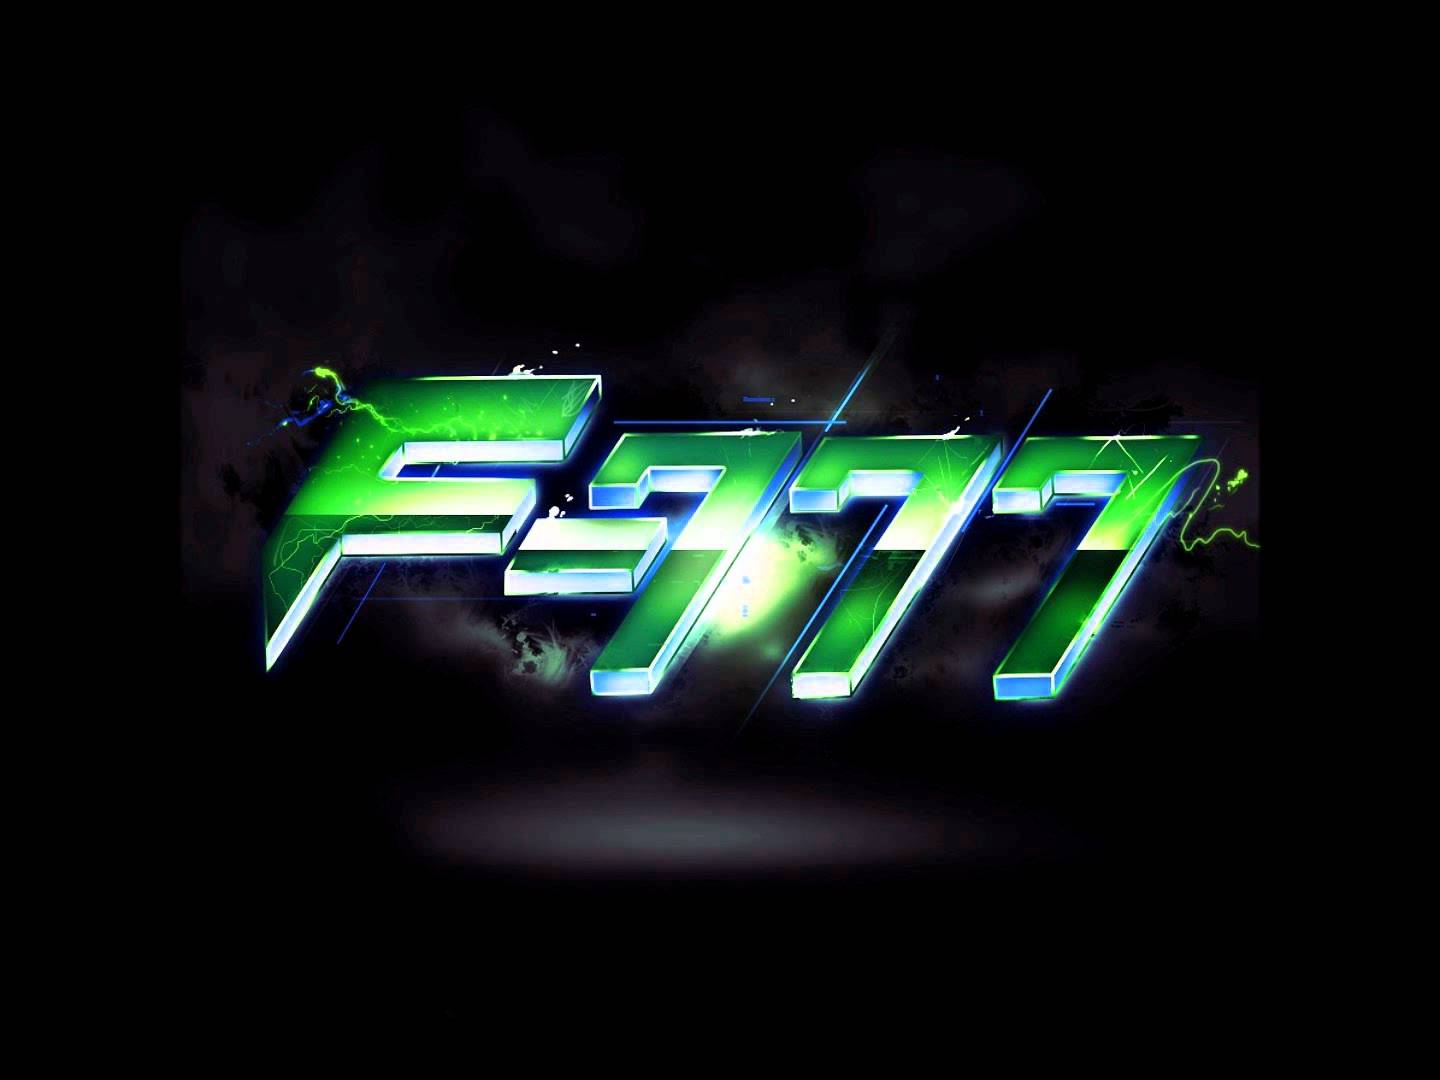 F-777 - Ludicrous Speed (Insanely Fast Techno)